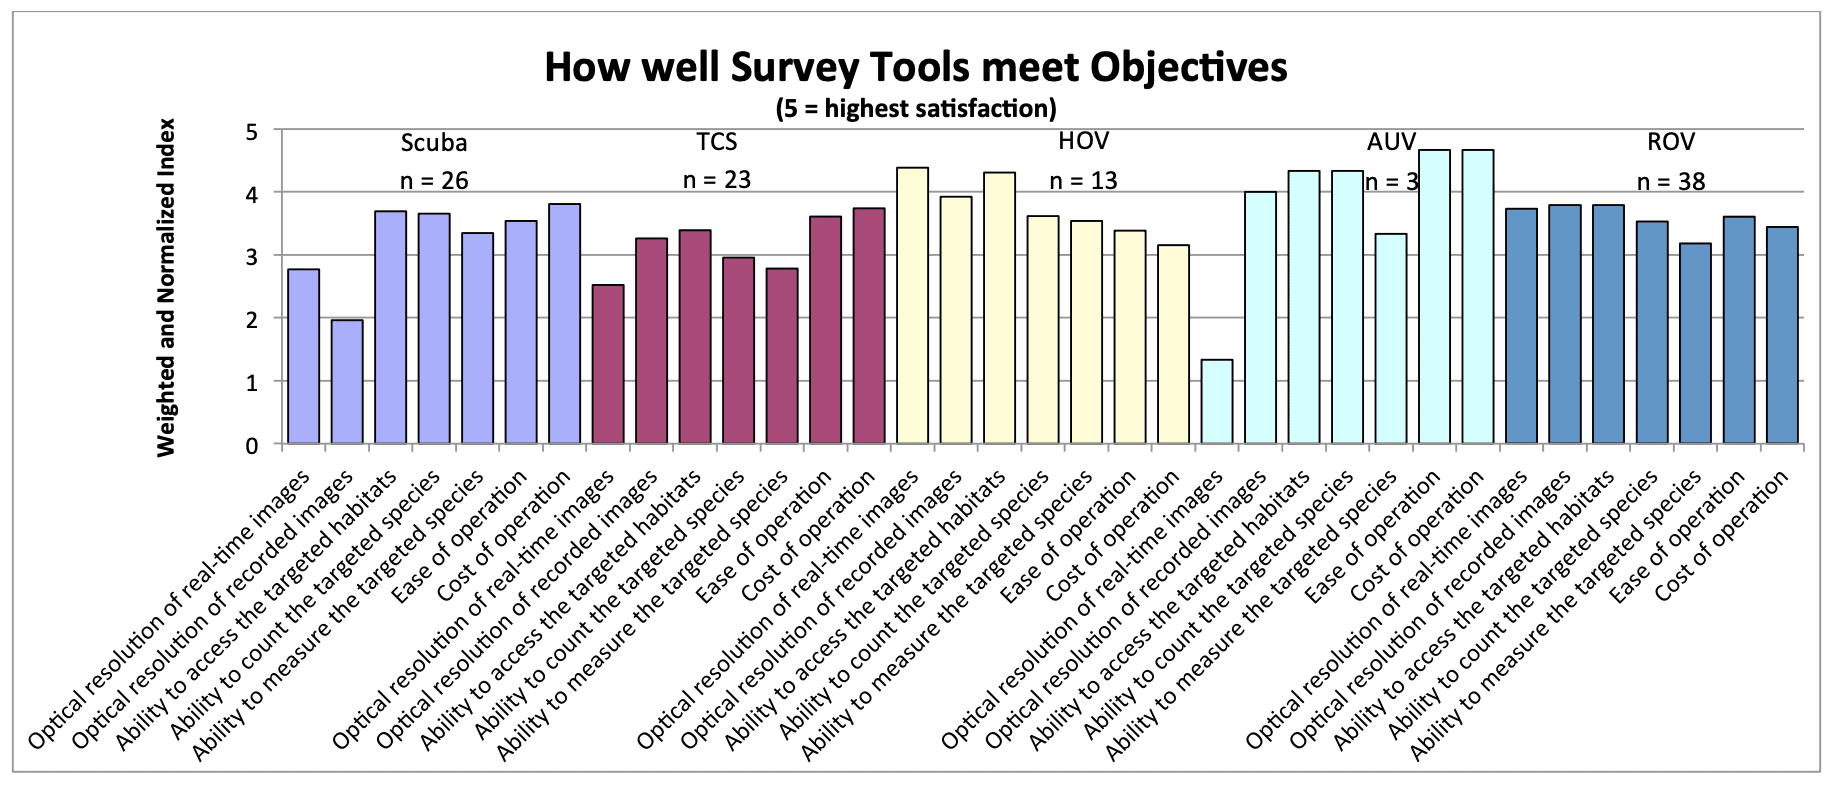 June 2015 - A COMPARATIVE ASSESSMENT OF UNDERWATER VISUAL SURVEY TOOLS: 101